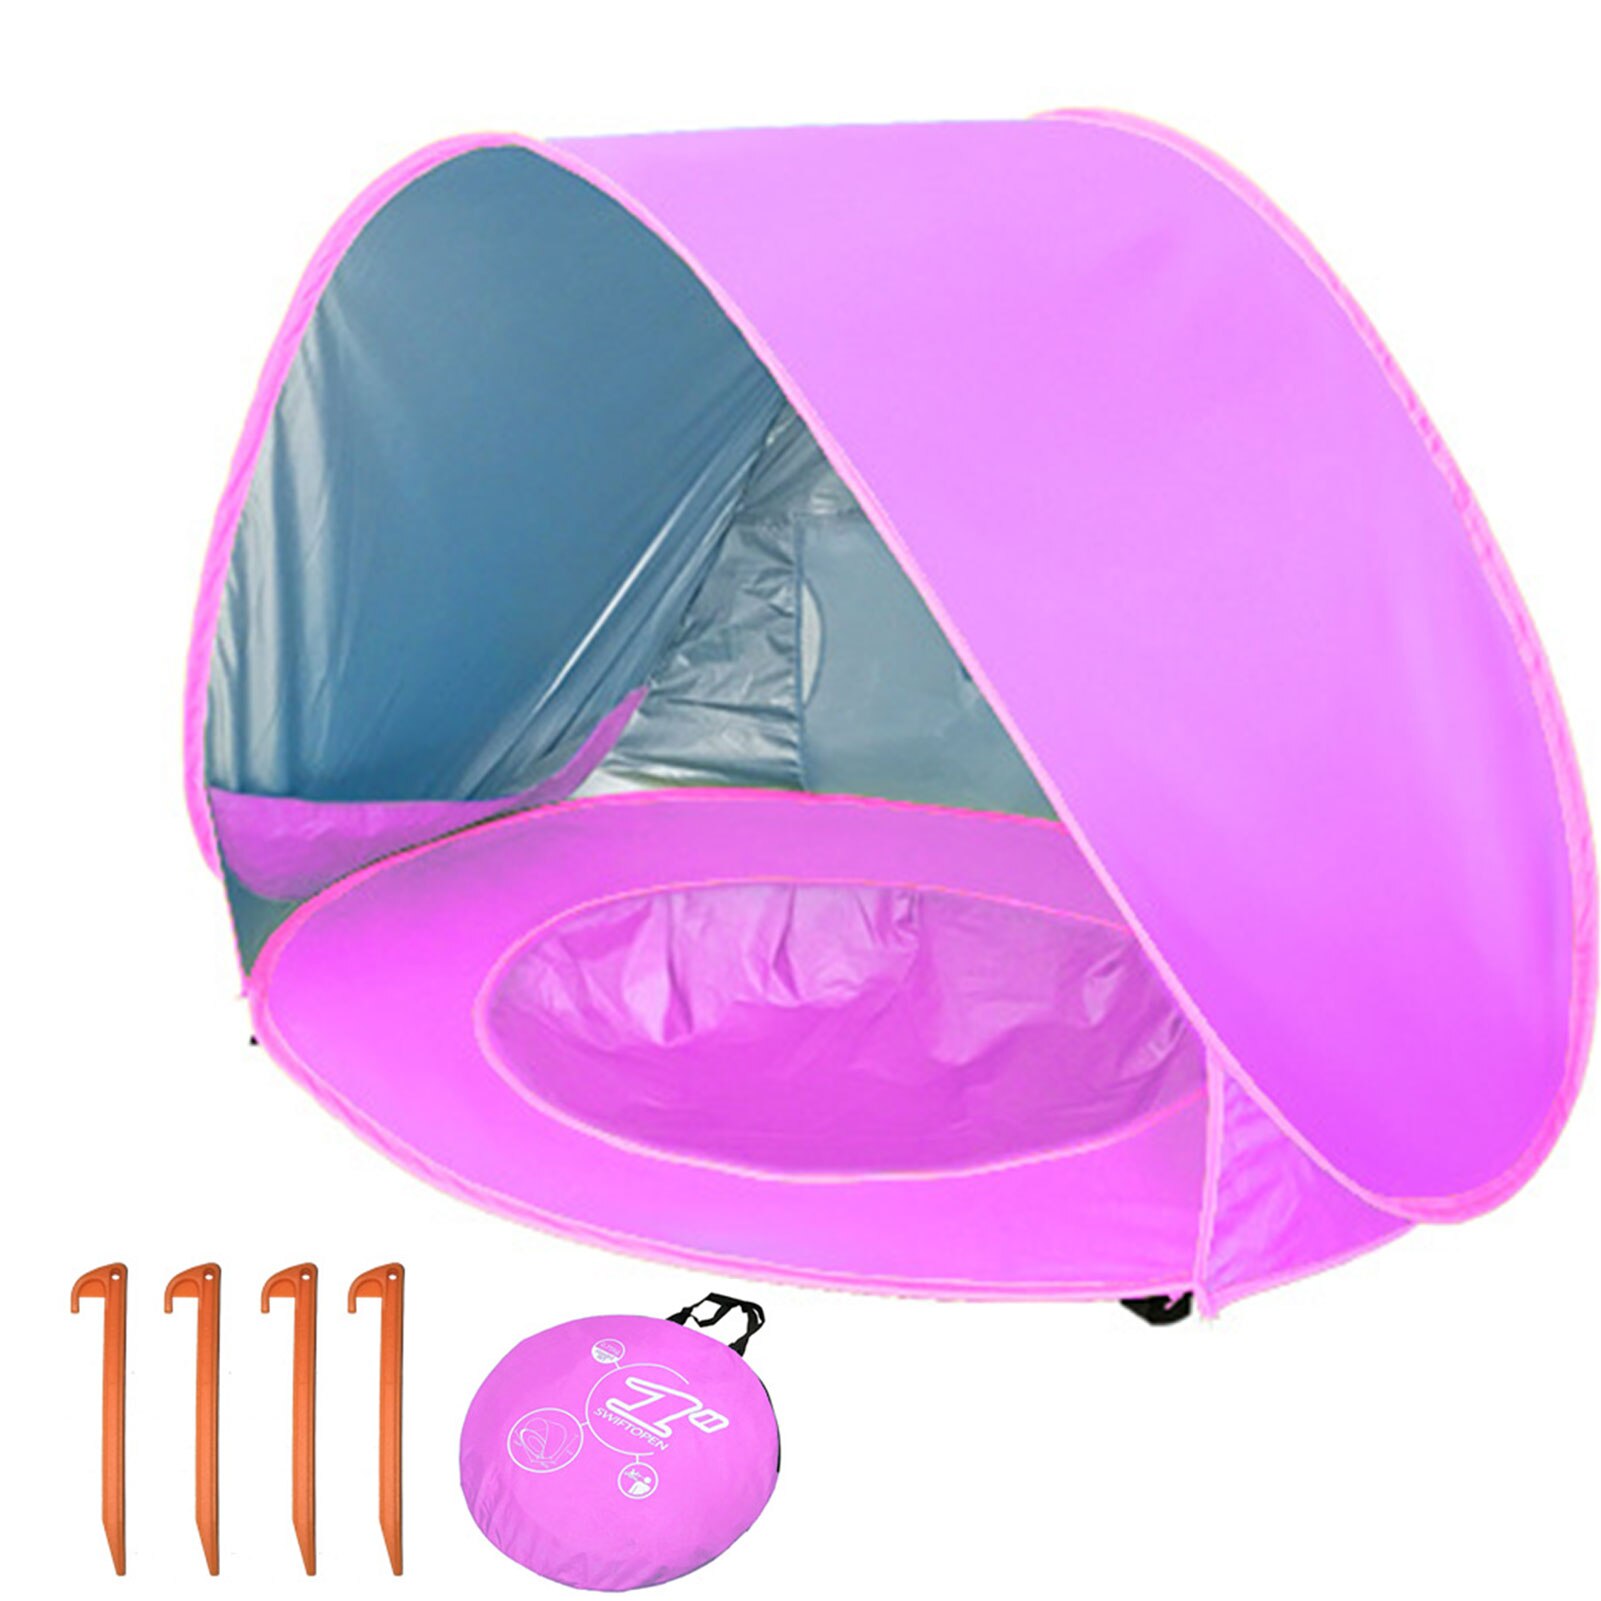 Cheap Goat Tents Waterproof Baby Beach Tent Pop Up Portable Shade Pool UV Protection Sun Shelter for Infant Kid Outdoor Camping Sunshade Beach   